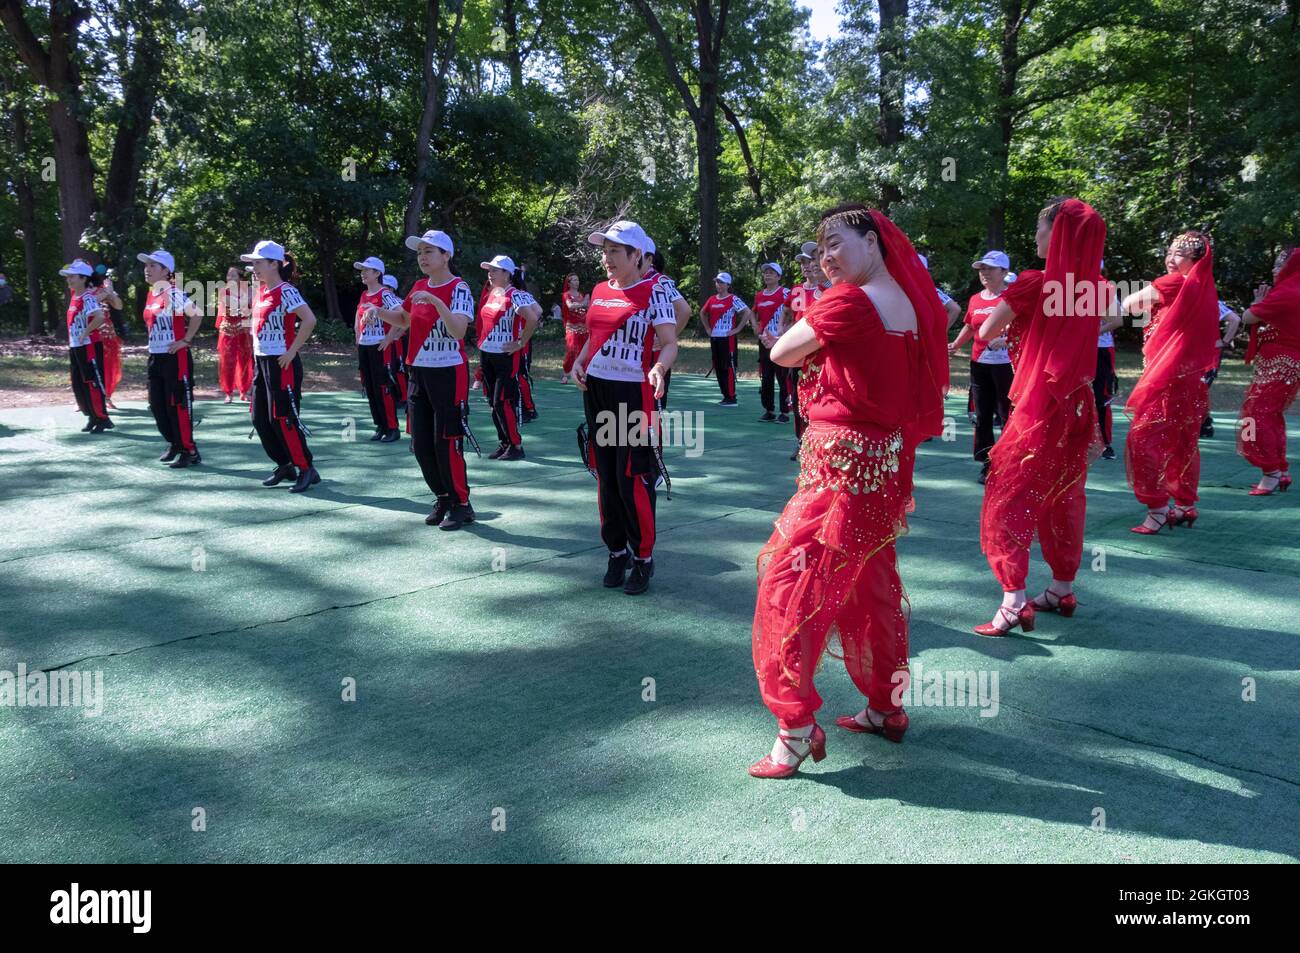 Women from Wenzhou, China in the Kai Xin Yizhu dance troupe celebrate their 6th anniversary with a performance in a Kissena Park in Queens, New York. Stock Photo